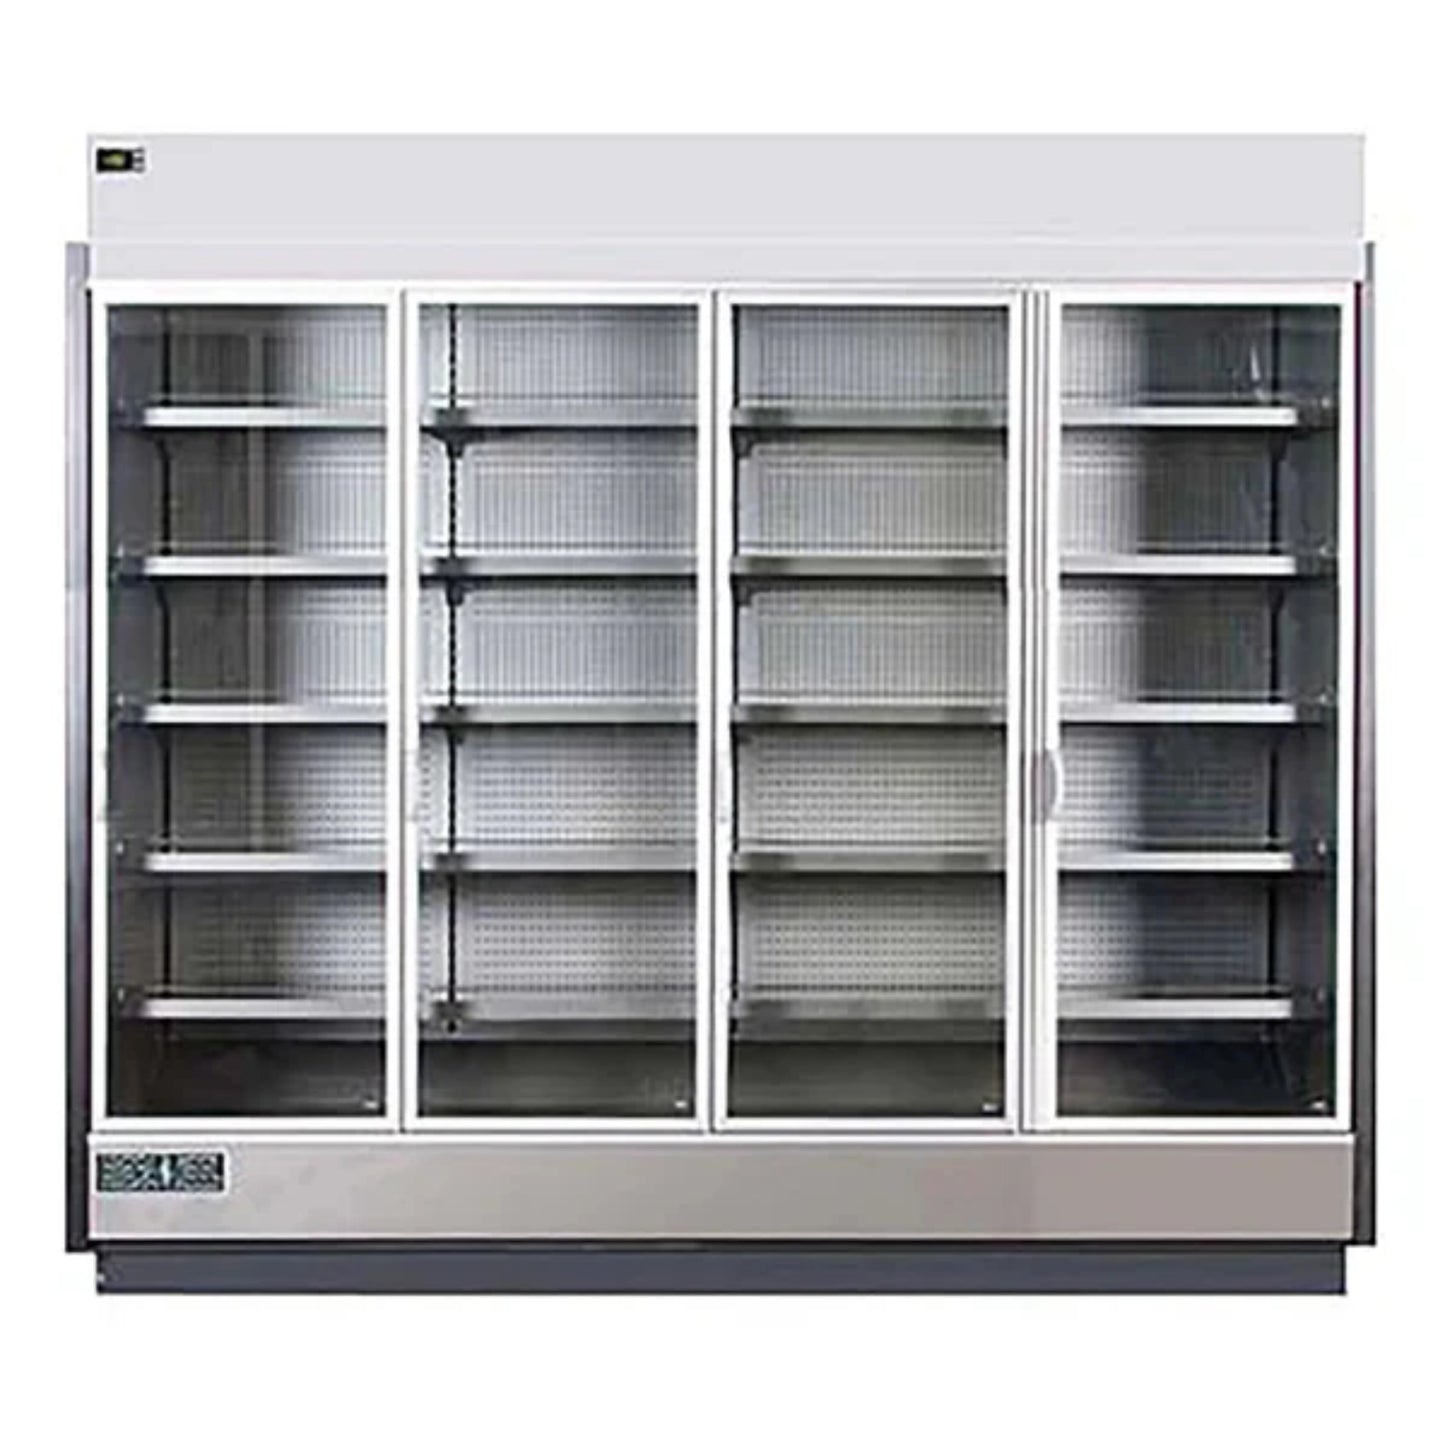 Hydra-Kool KGV-MD-4-S 4-Door High Volume Grab And Go Self-Contained